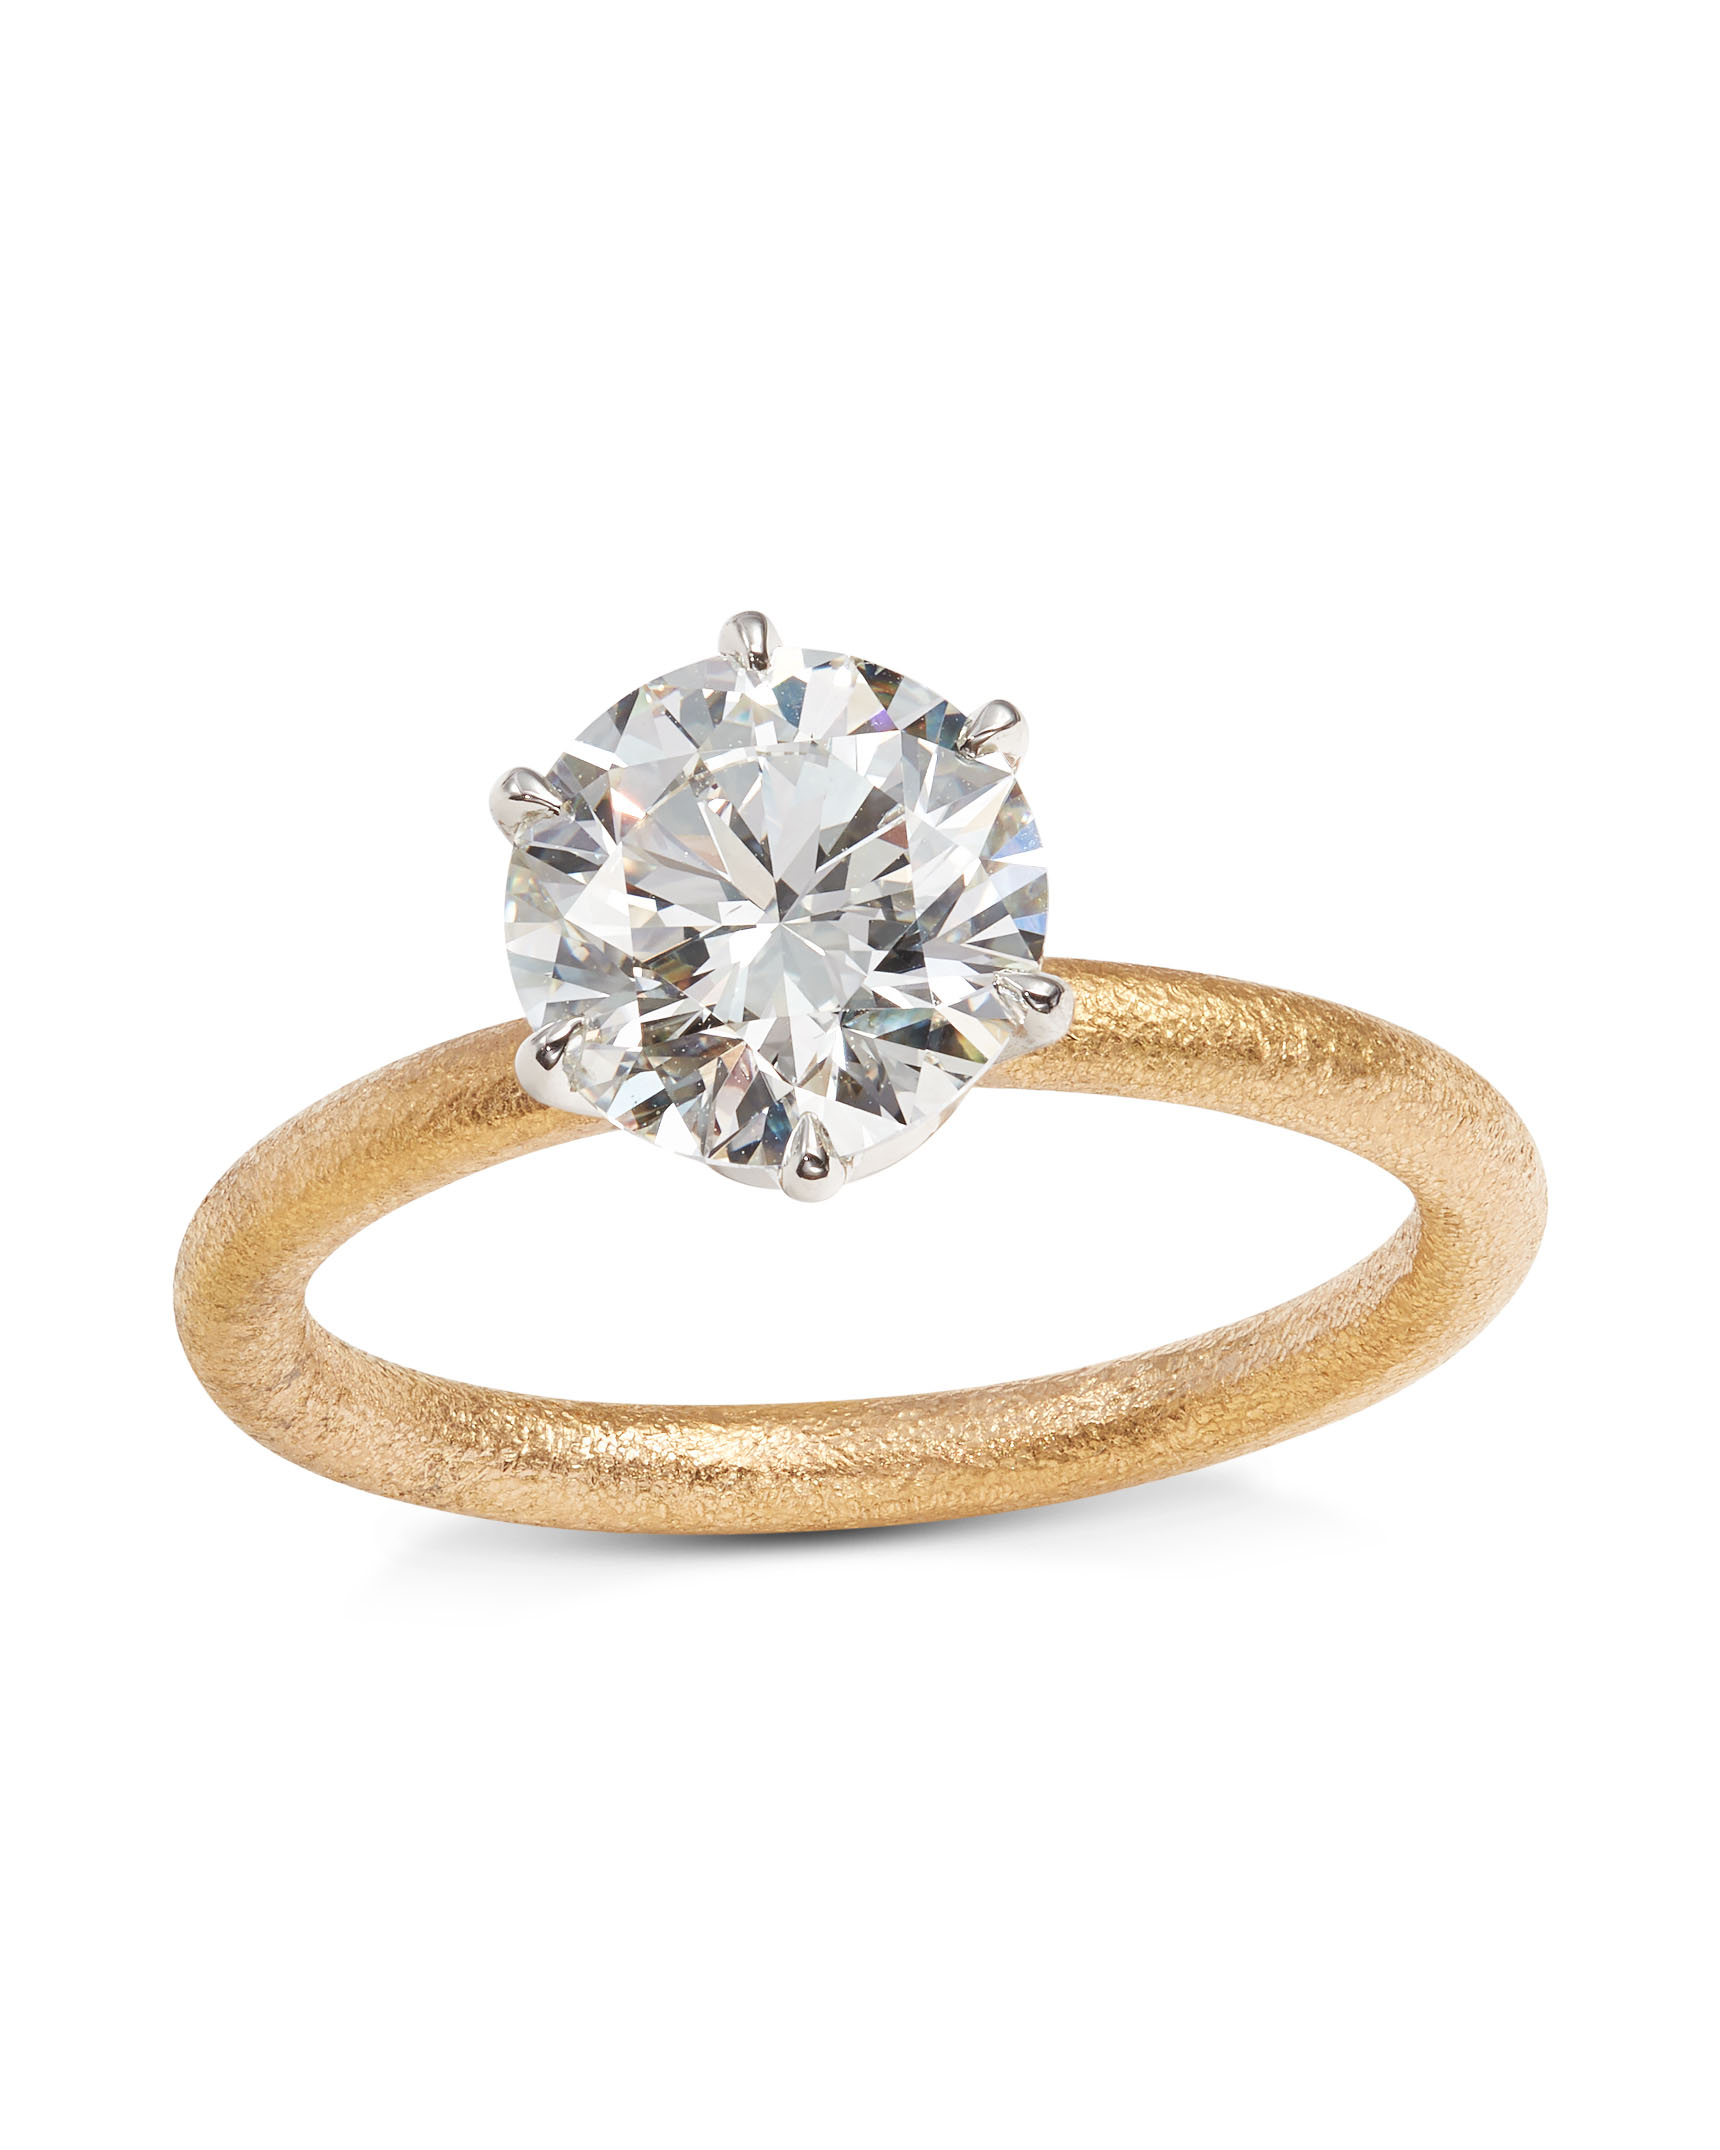 Buy Round 18KT Yellow Gold Ring Online | ORRA